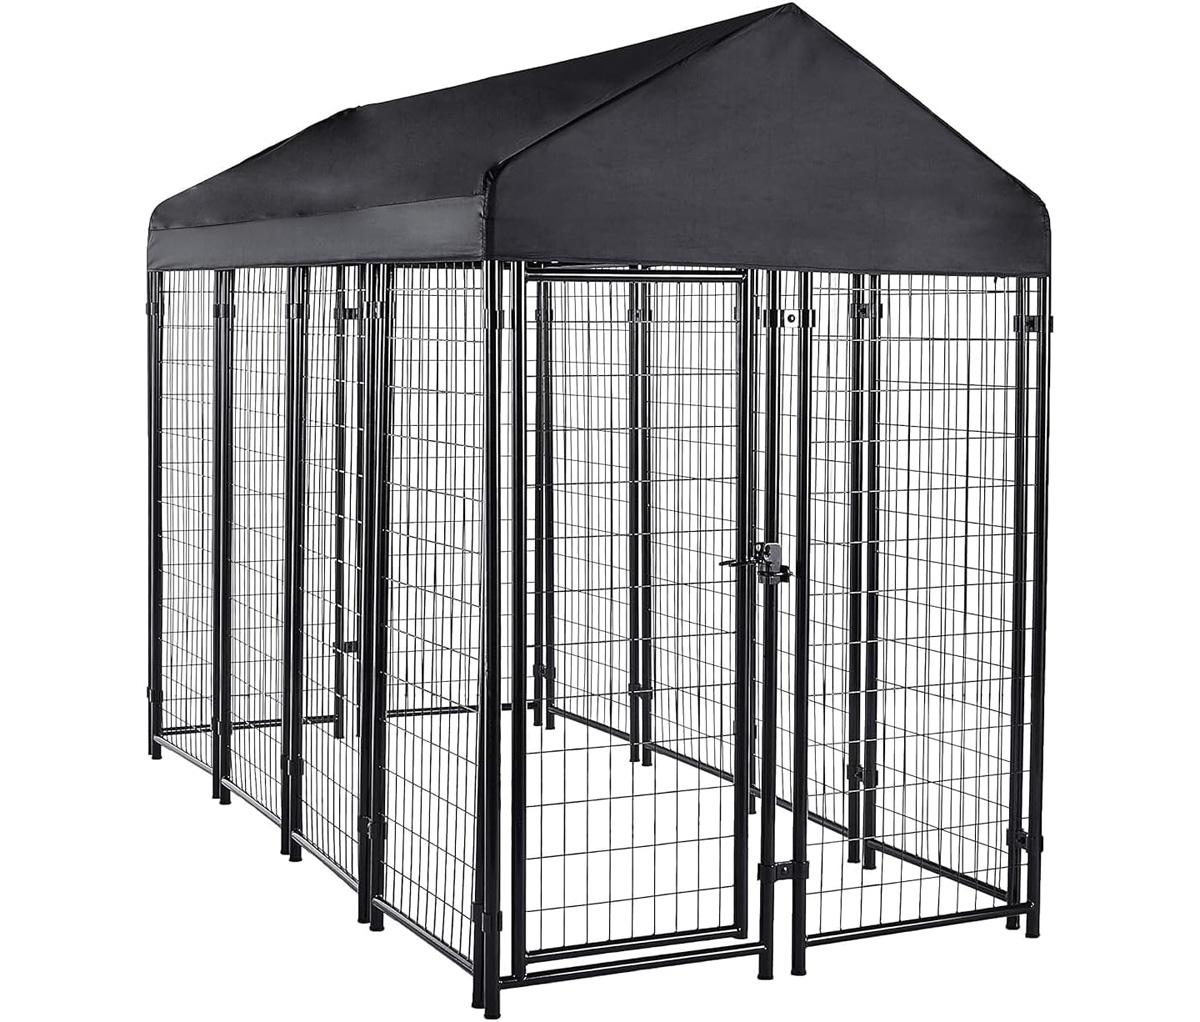 Amazon Basics Welded Rectangular Outdoor Wire Crate Kennel for $222.89 Shipped